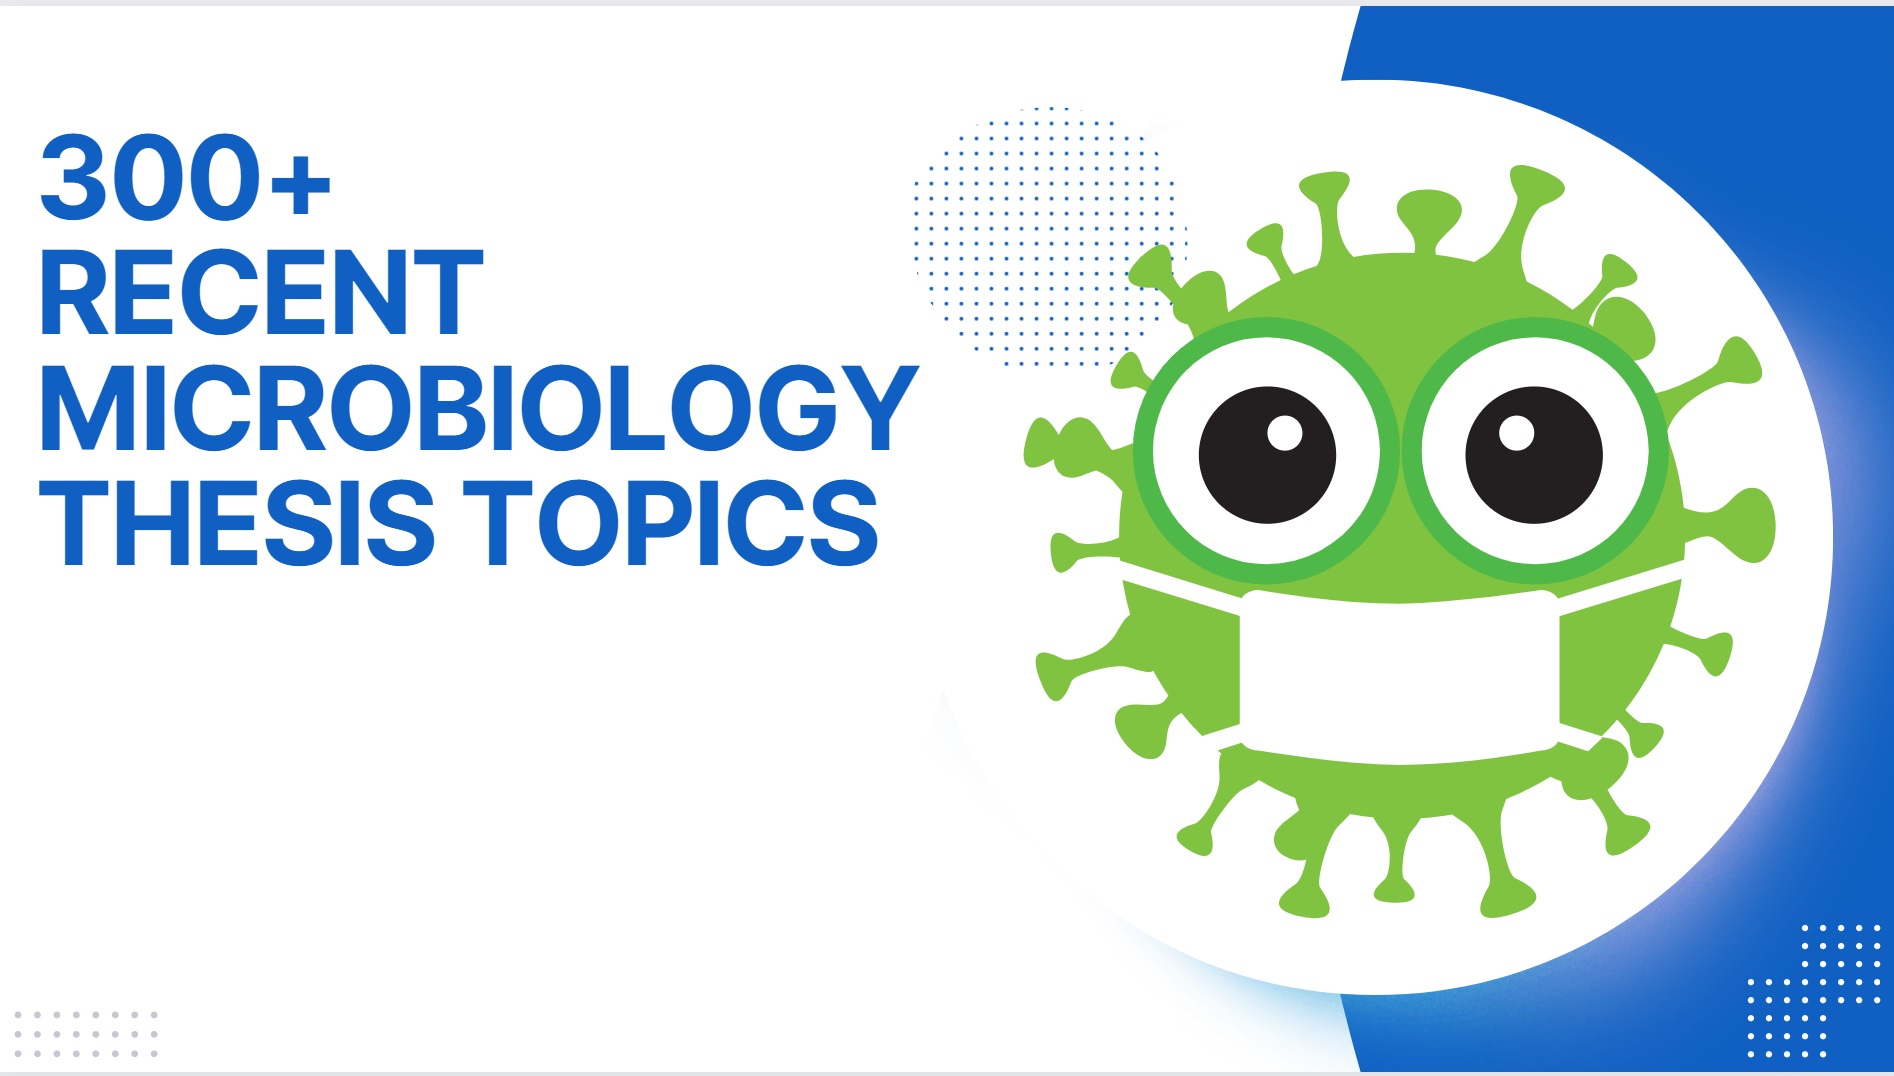 md microbiology thesis topics